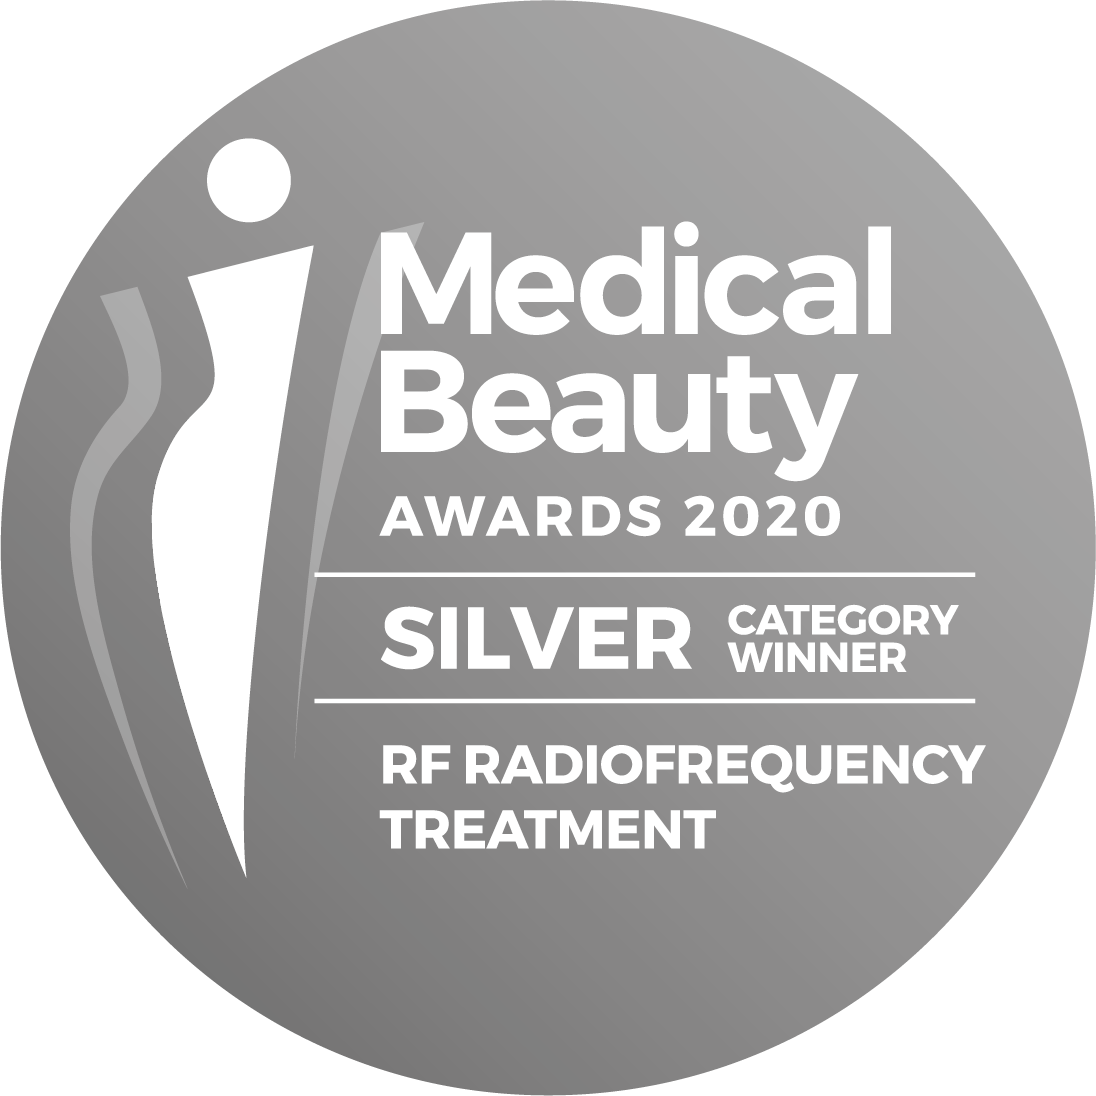 Medical Beauty Awards RF Radiofrequency Treatment Silver category winner